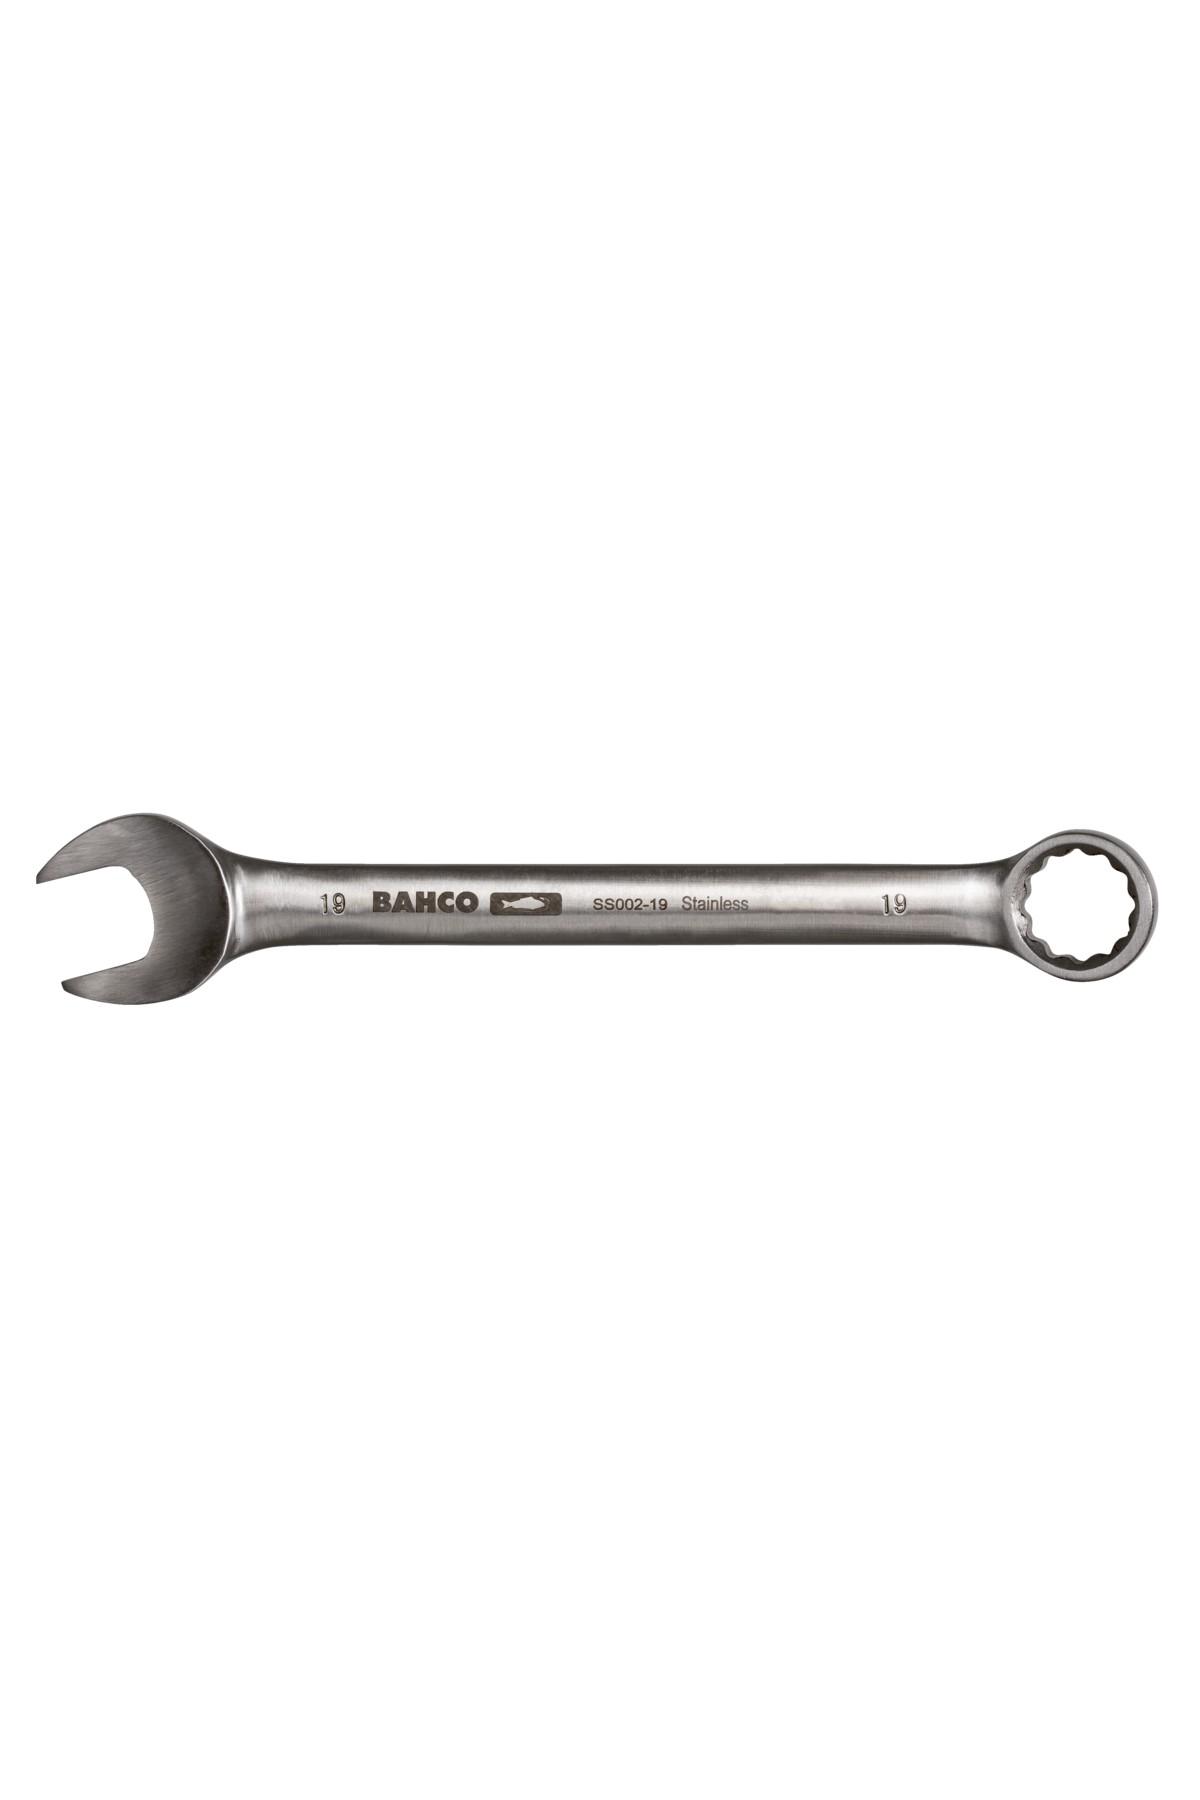 Ring spanner stainless 22mm